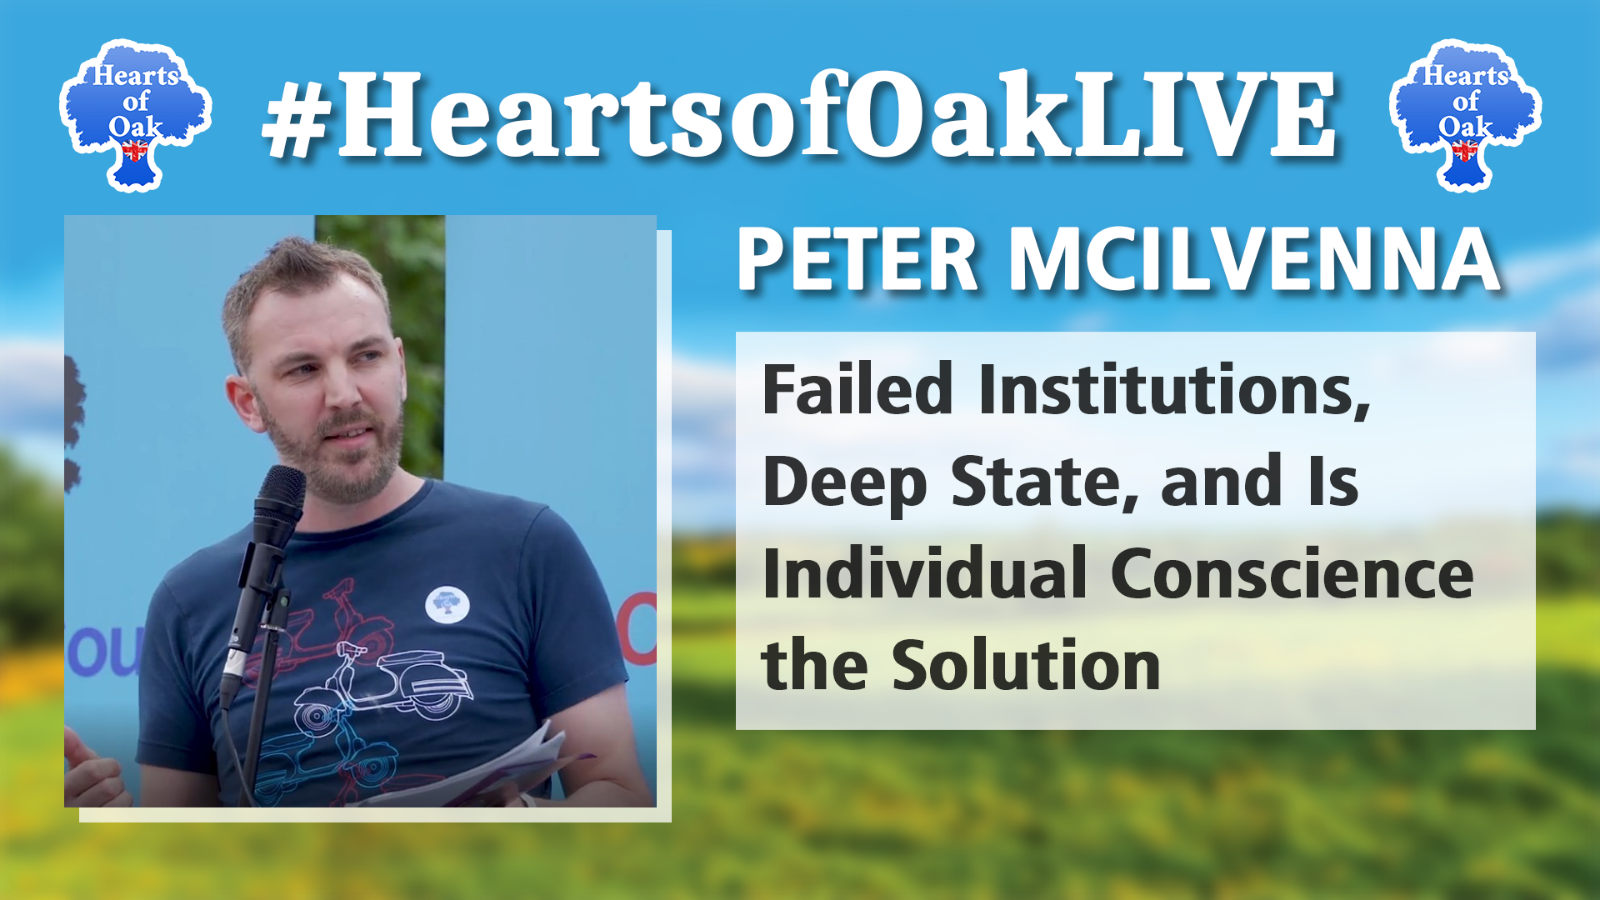 Peter Mcilvenna - Failed Institutions, Deep State, and Is Individual Conscience the Solution